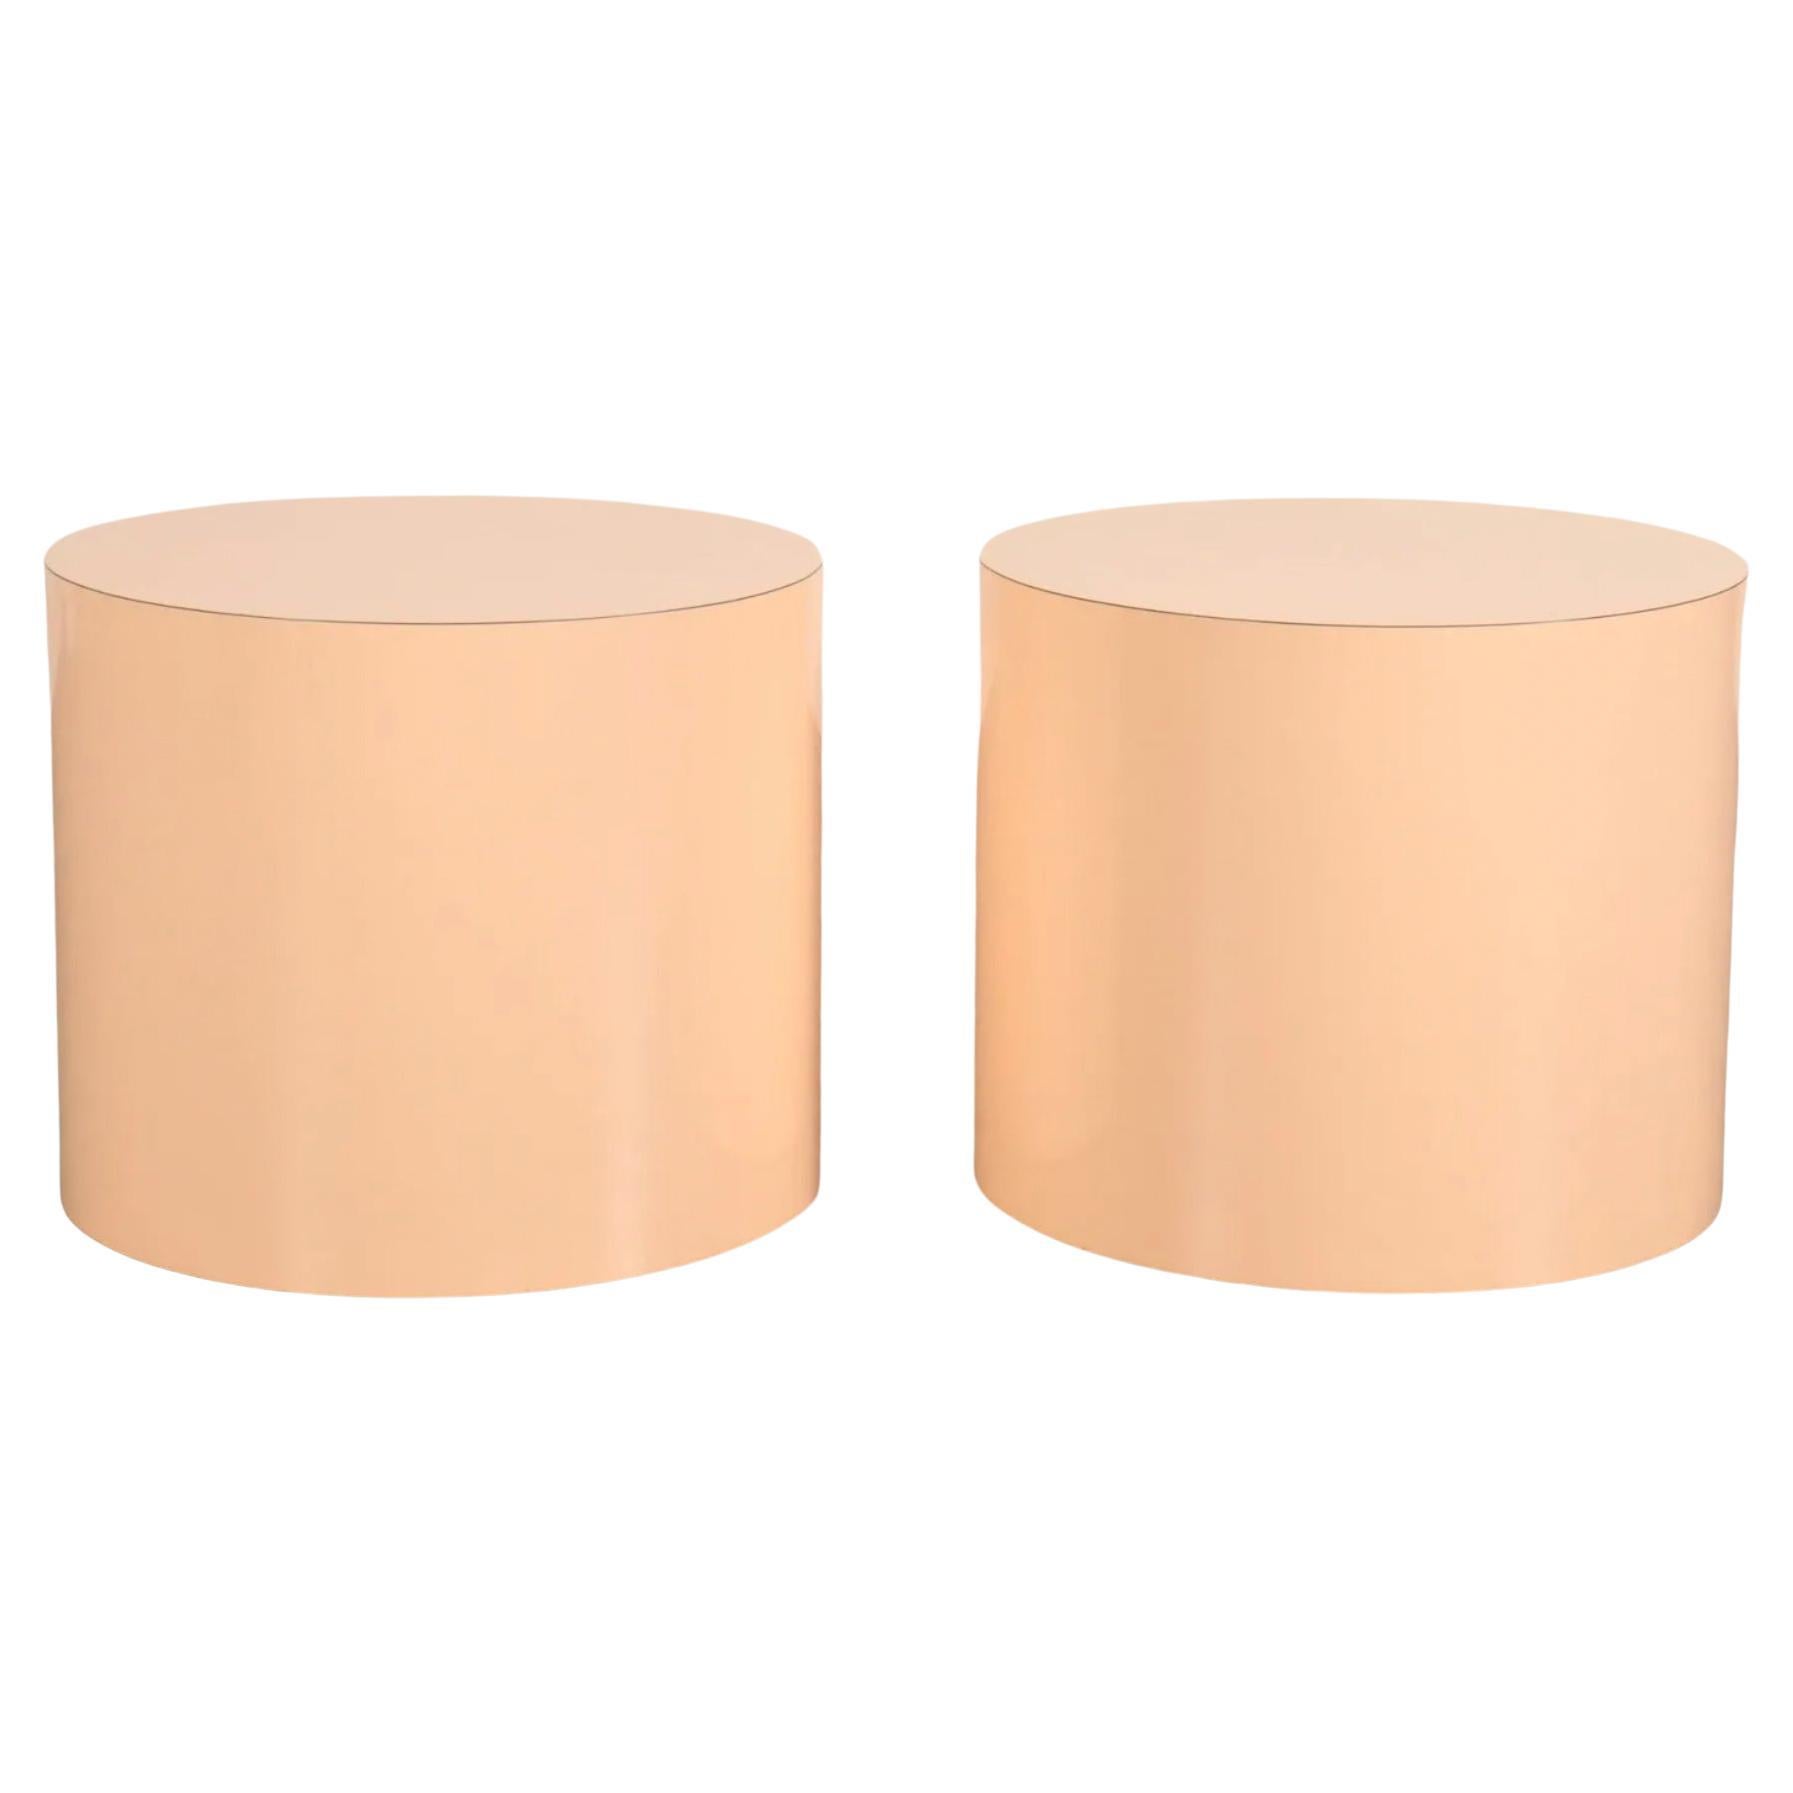 Pair Post modern pink gloss laminate round Cylinder end Drum tables. In the style of Karl Springer or Paul Mayen. Very clean set. No chips or scratches. Circa 1980. Located in Williamsburg Brooklyn NYC.

Sold as a pair (2) 

Each table measures 20”